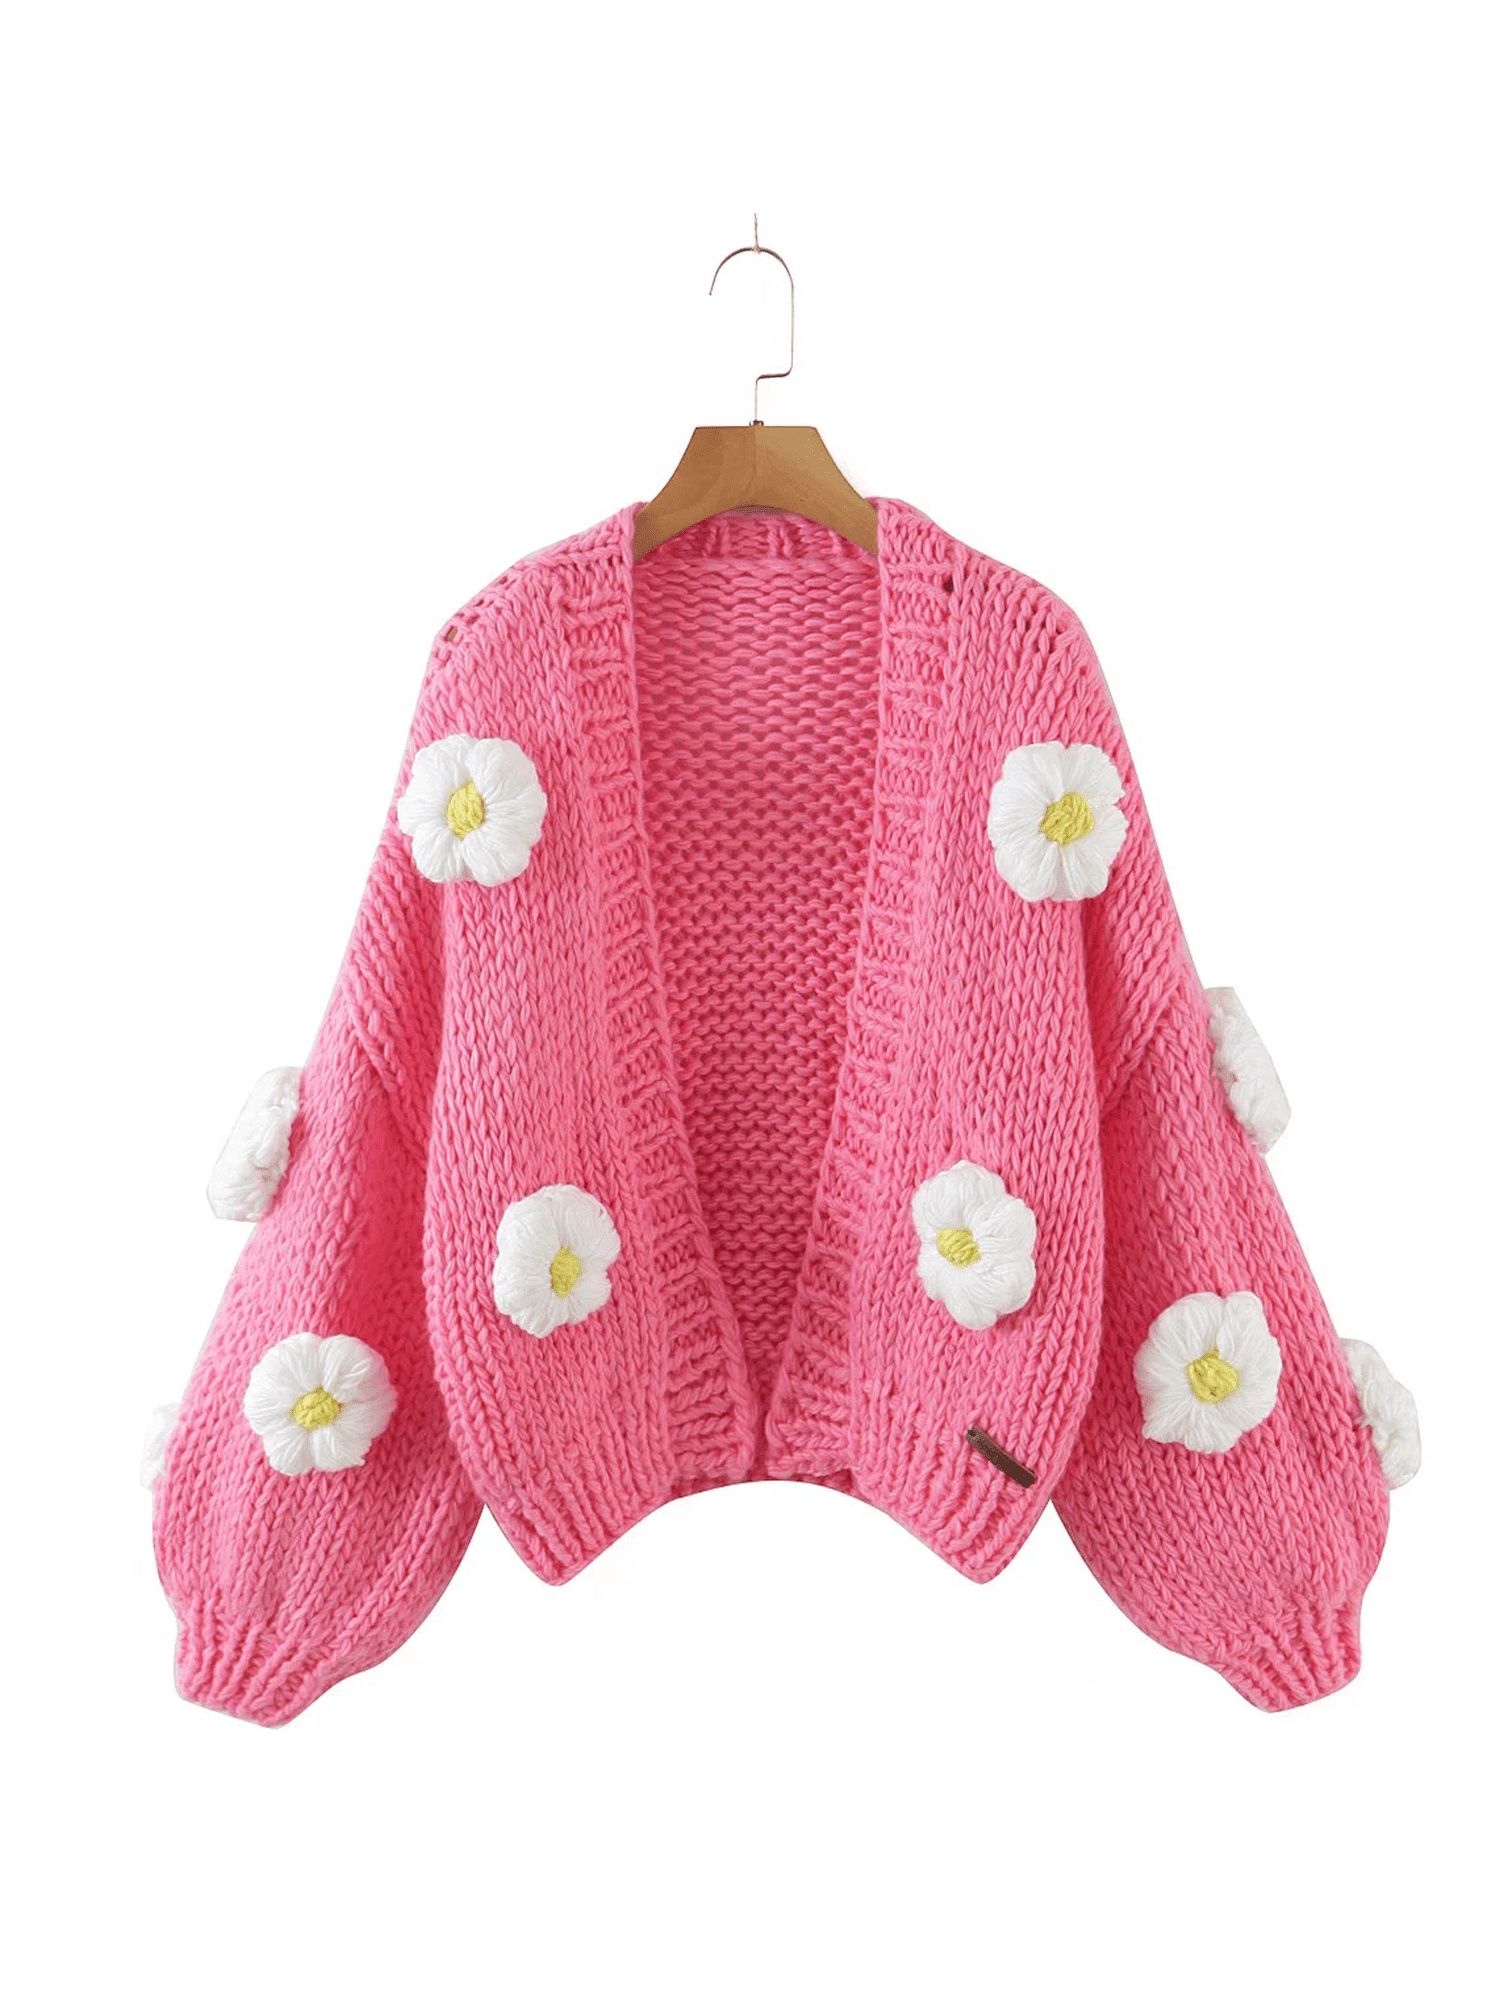 DressU Mens Crew-Neck Knitted Long Sleeve Pullover Fashion Floral Sweater 